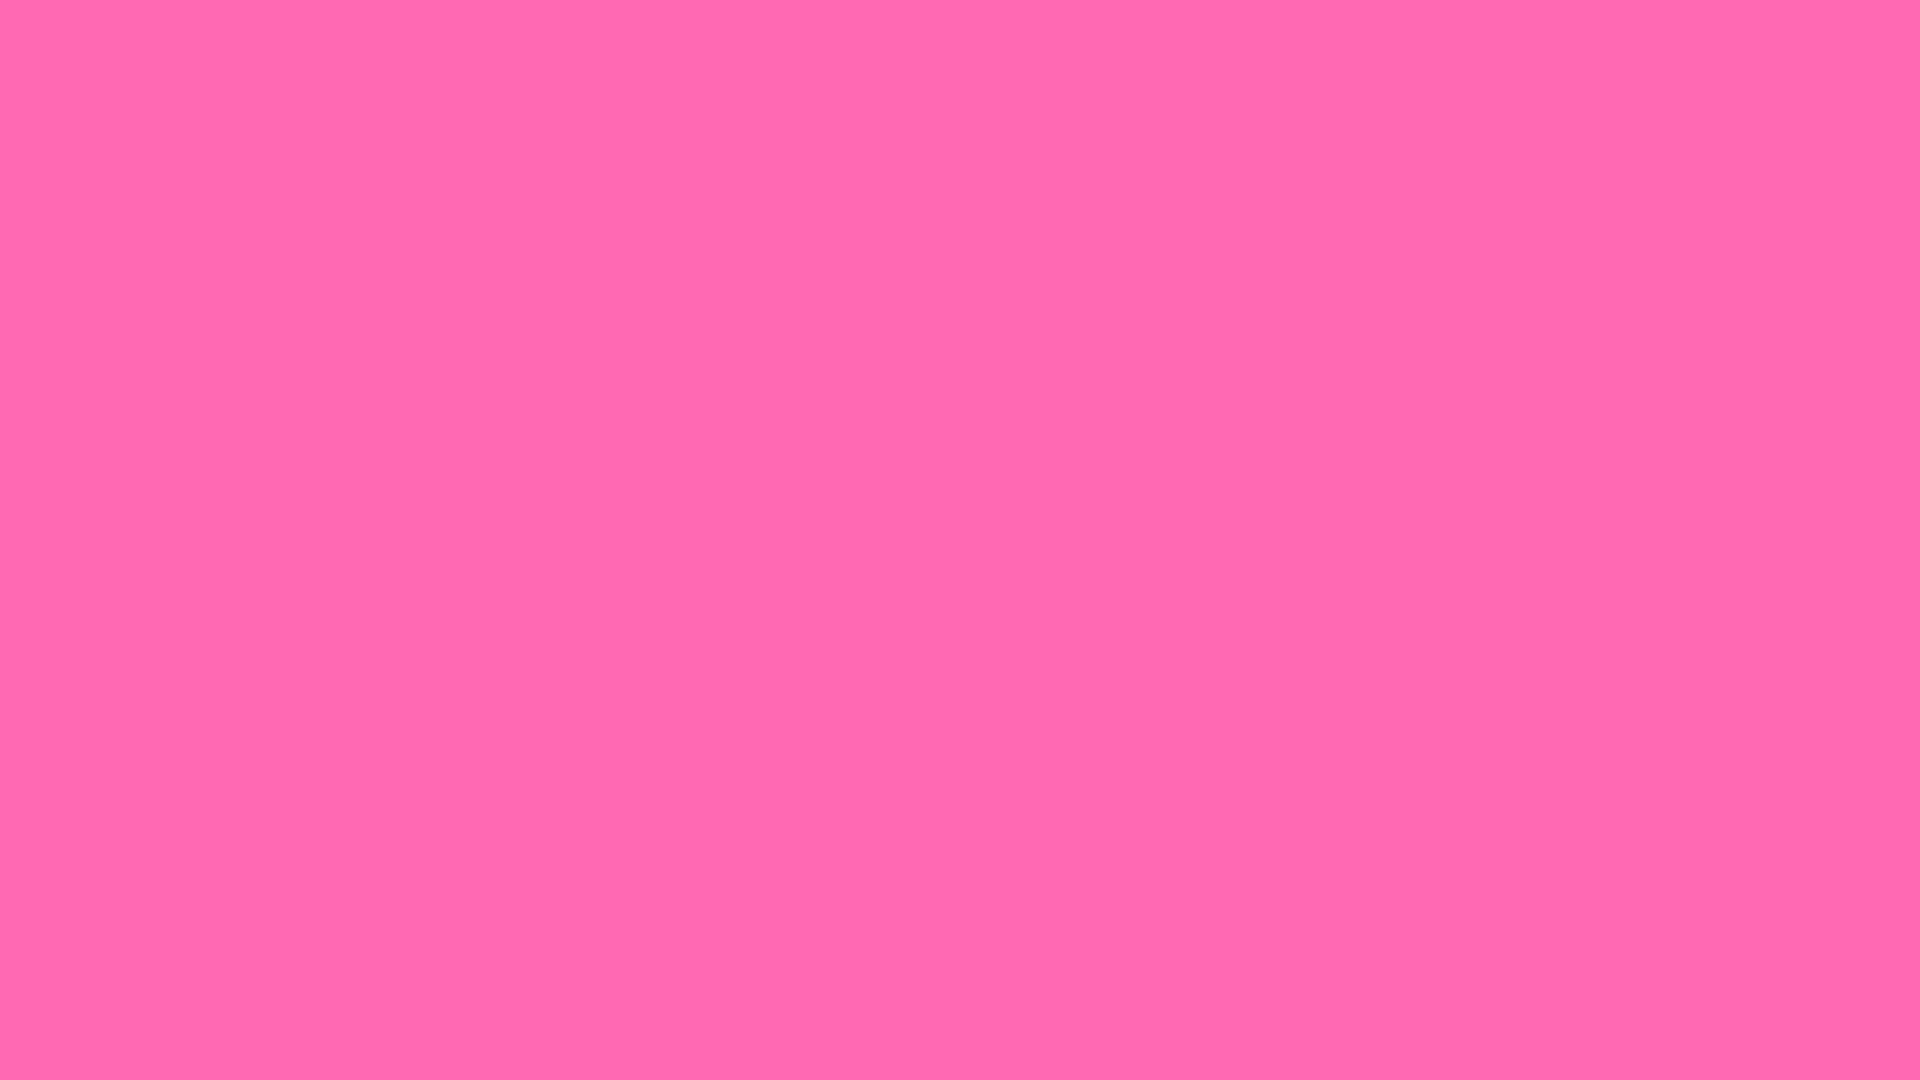 1920x1080 Hot Pink Solid Color Background